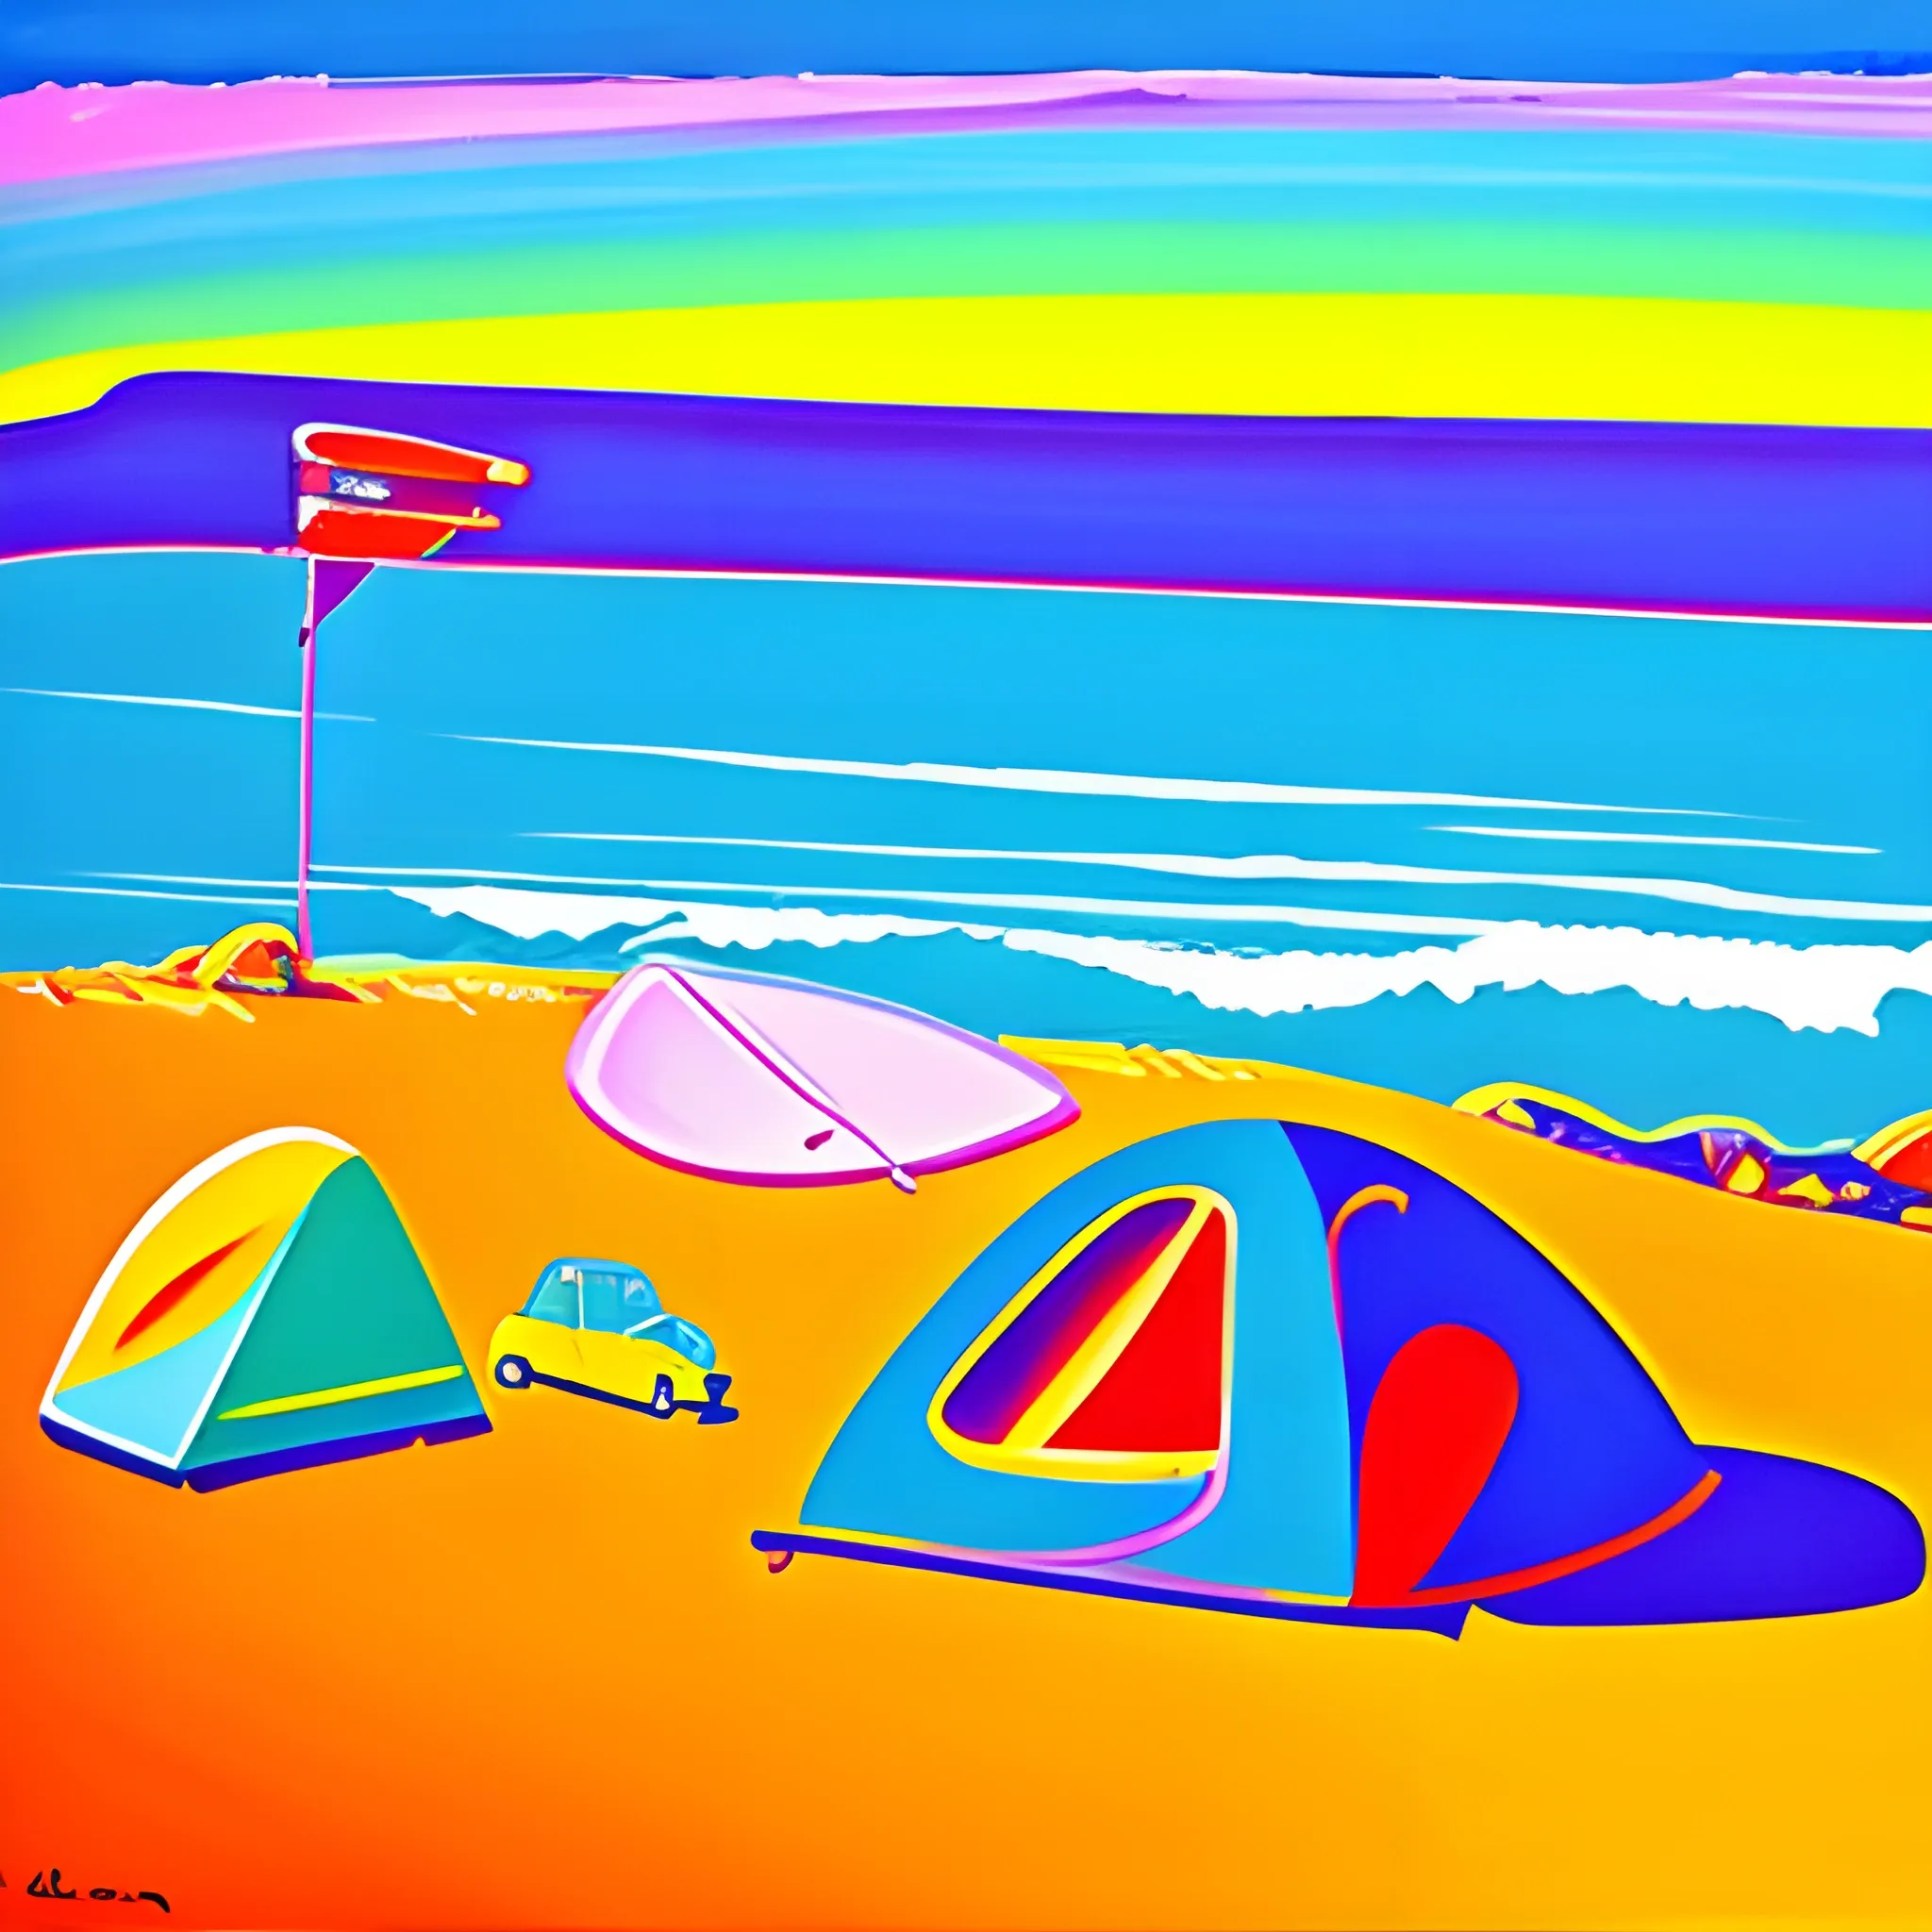 Peter Max painting that capture the essence of surfing, camping, van life